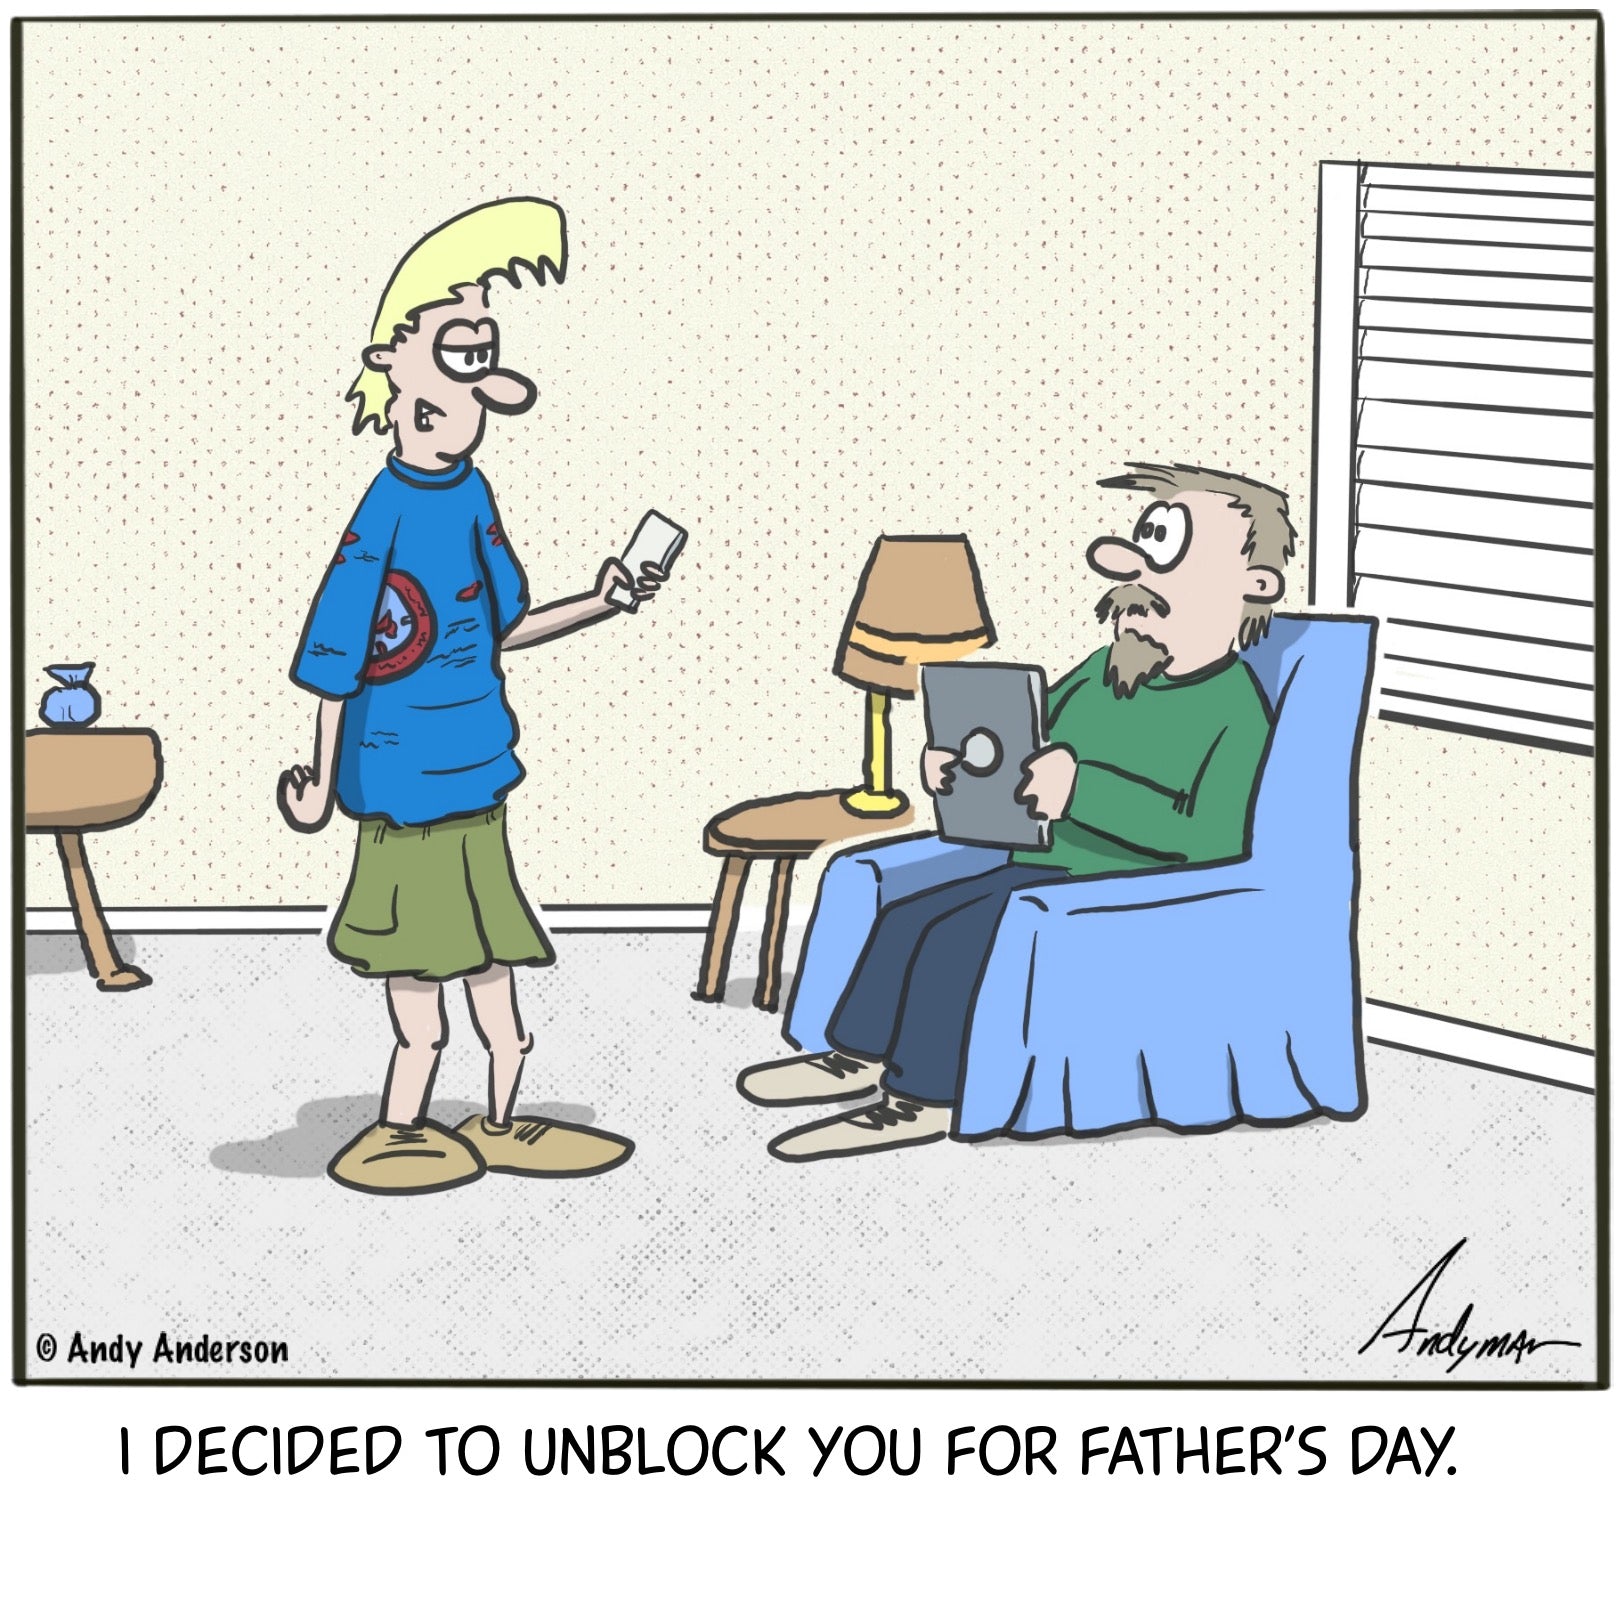 Cartoon about a boy unblocking his dad for father's day